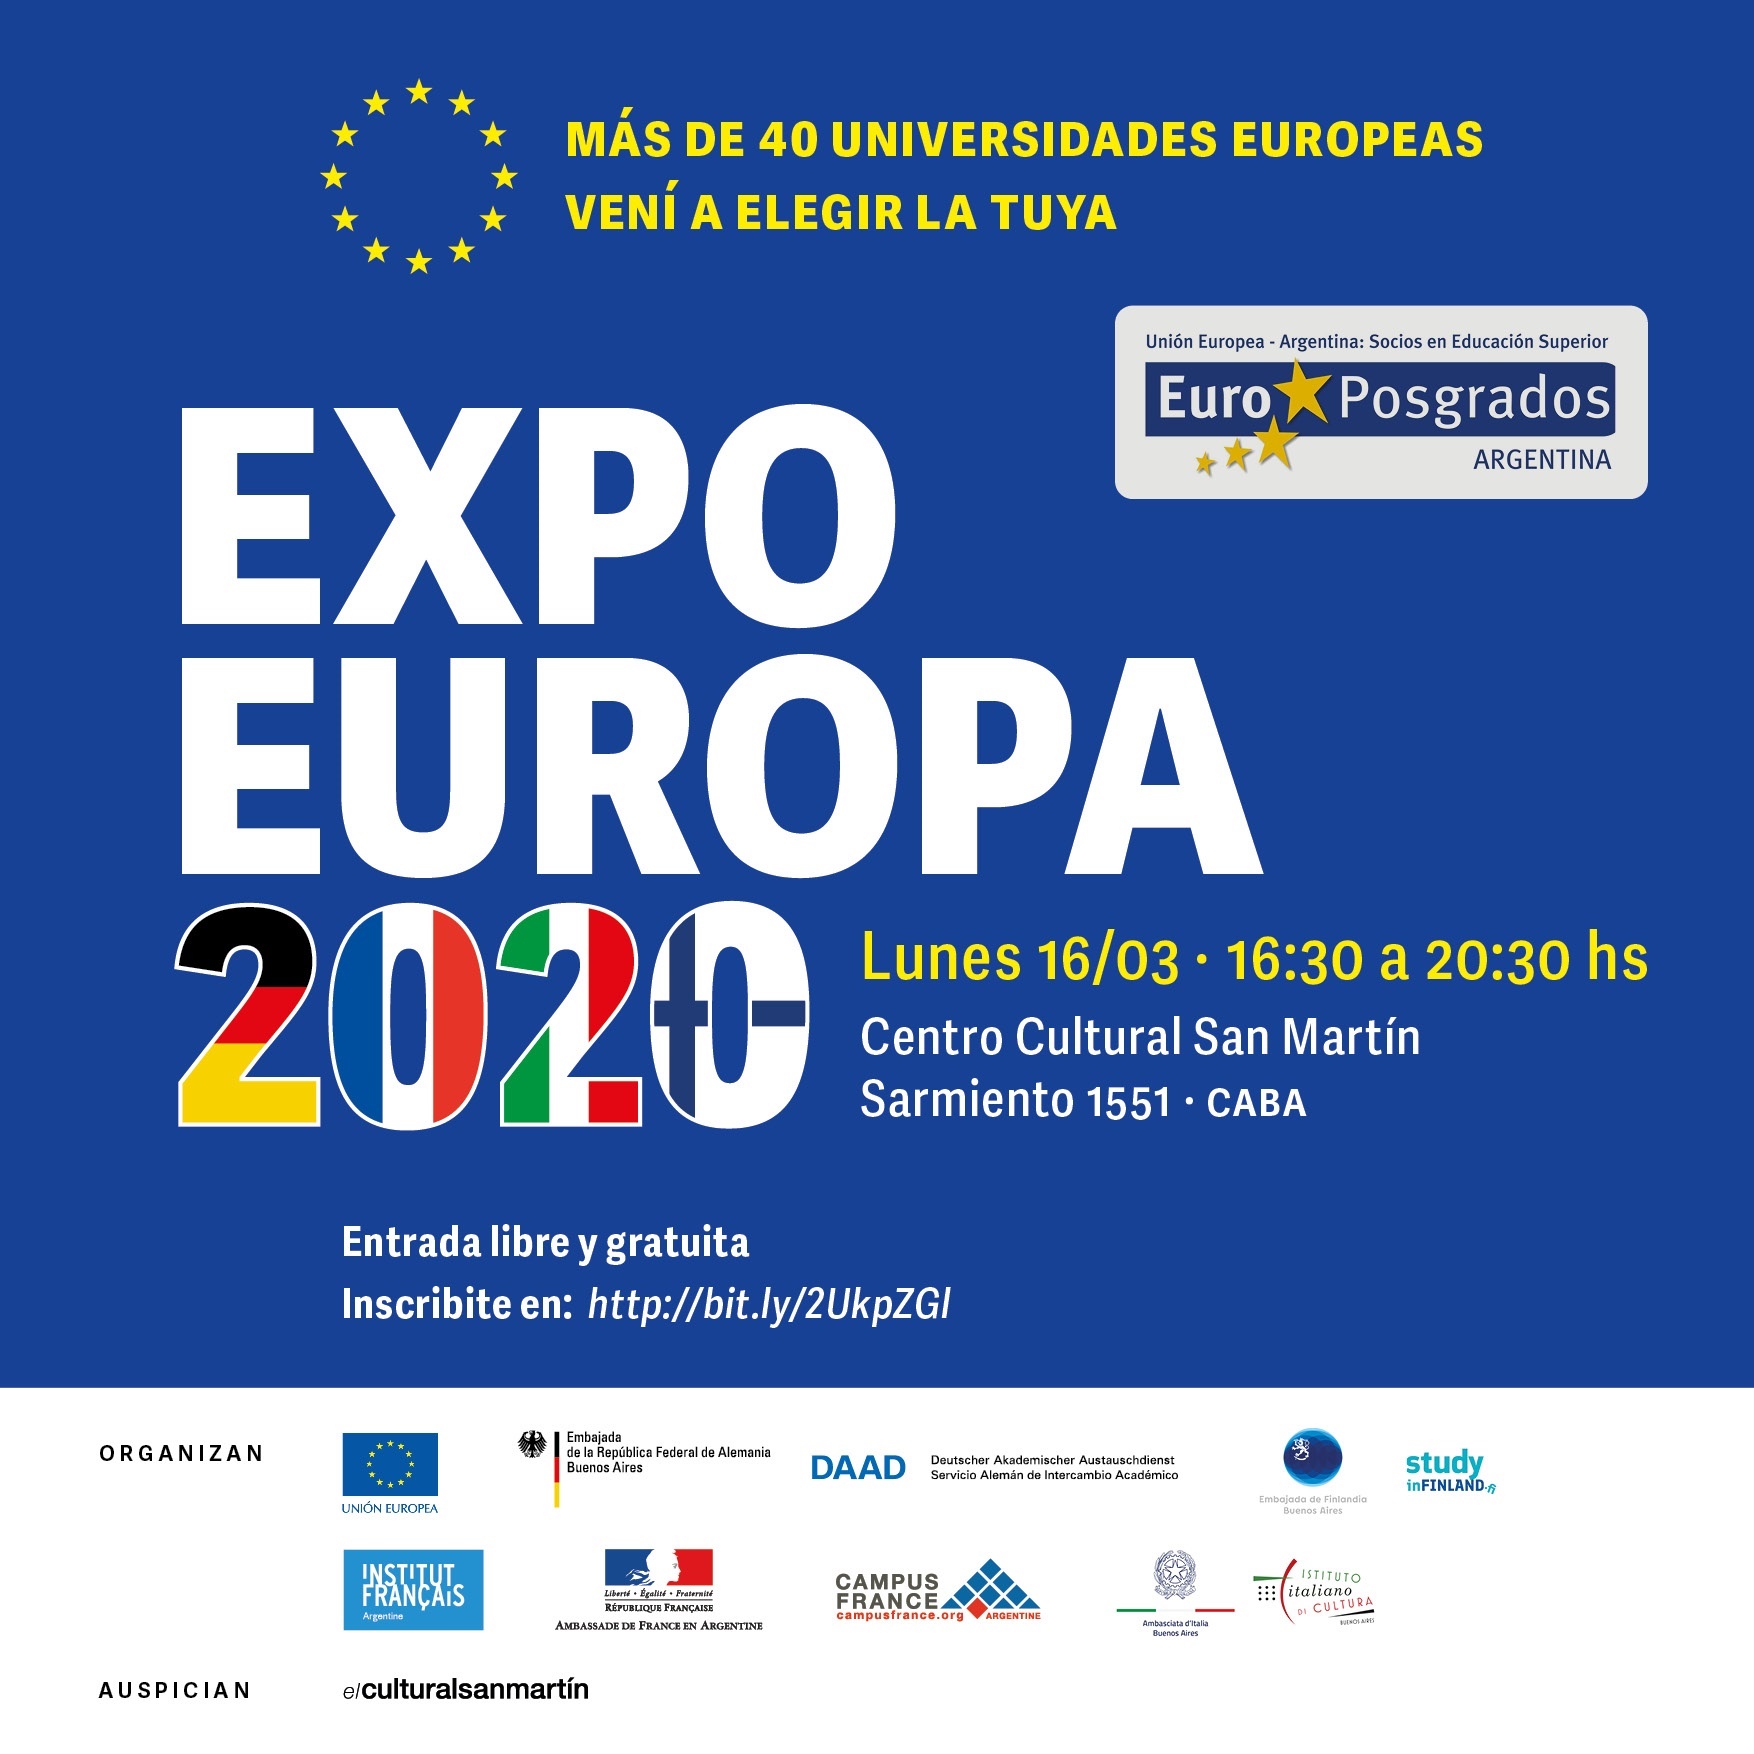 EXPO EUROPA 2020, Buenos Aires, Argentina Study in Finland